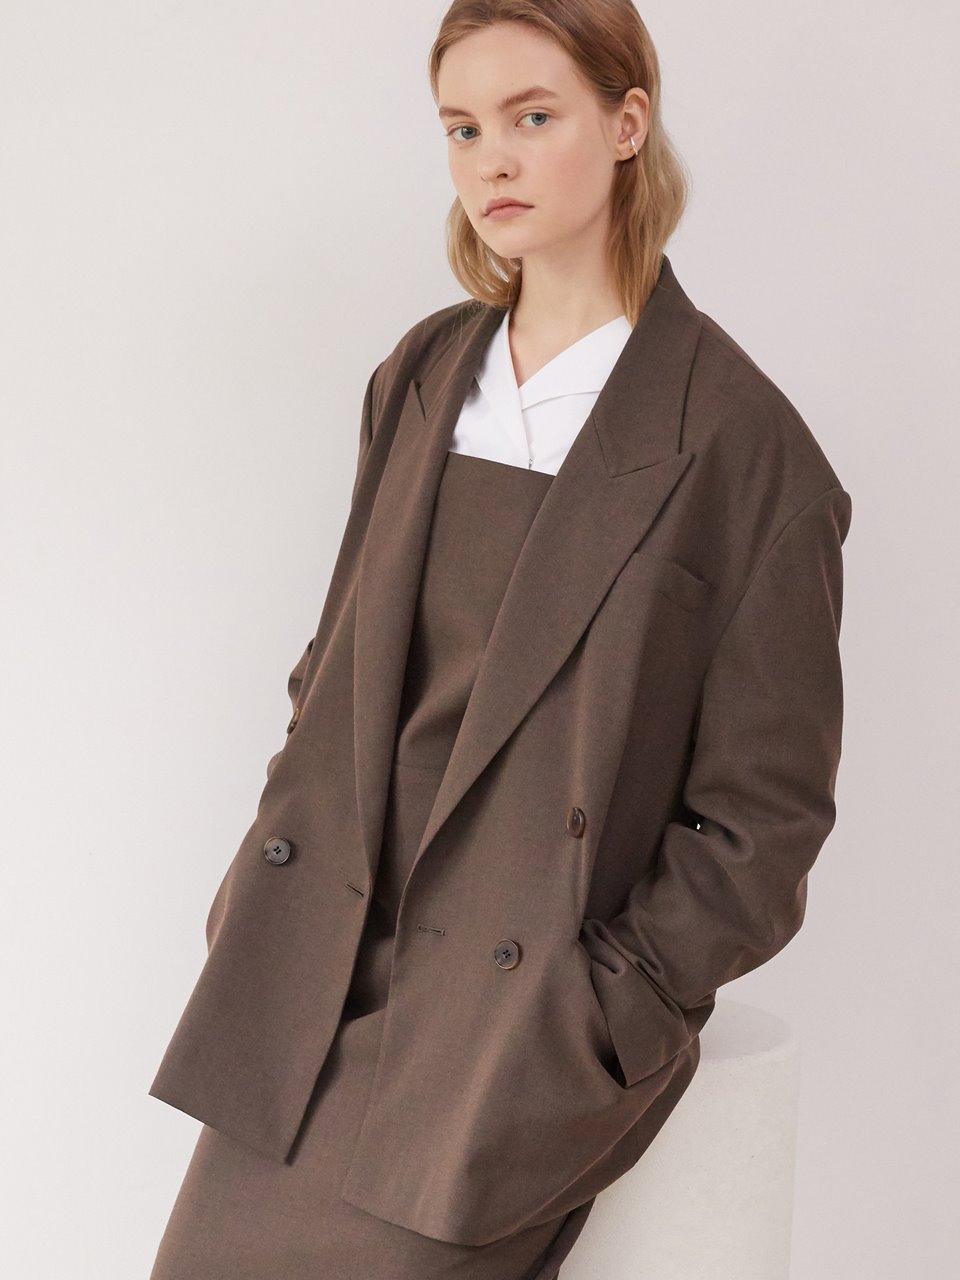 Overfit double jacket - Brown